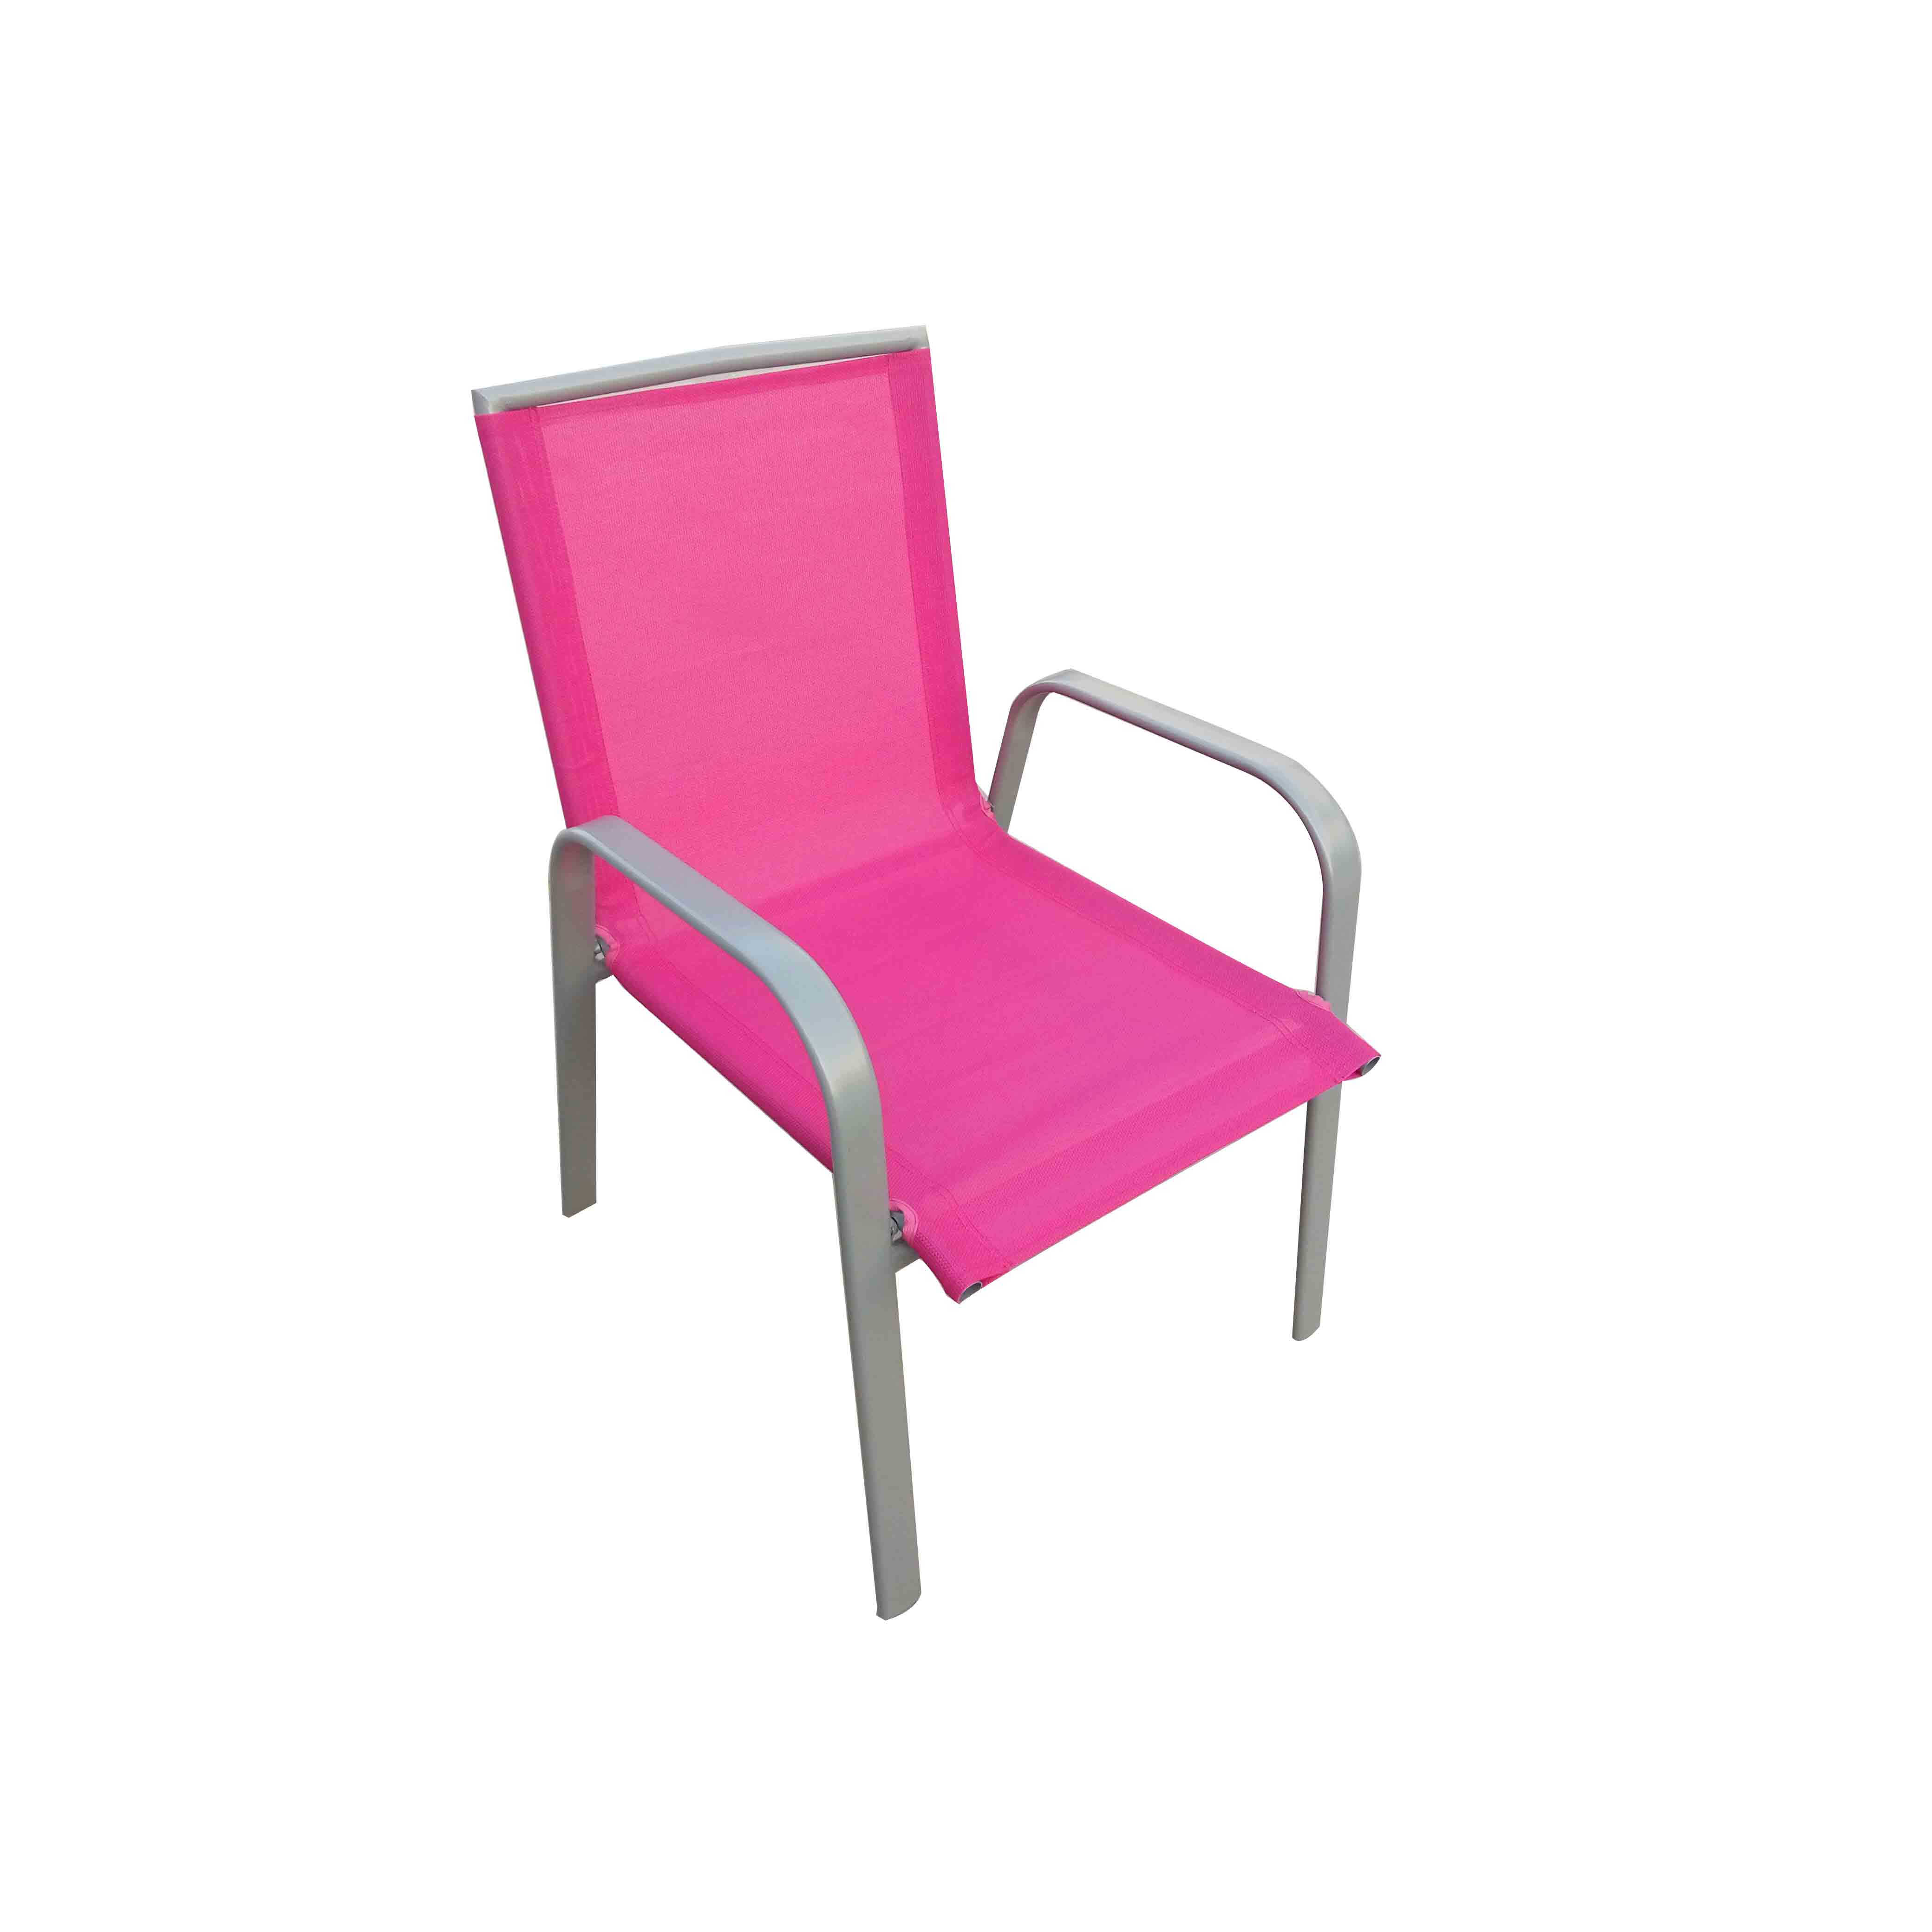 China Wholesale Outdoor Beach Chair Exporters - JJ302C-Fuscia Kid’s steel textilene stacking chair – Jin-jiang Industry